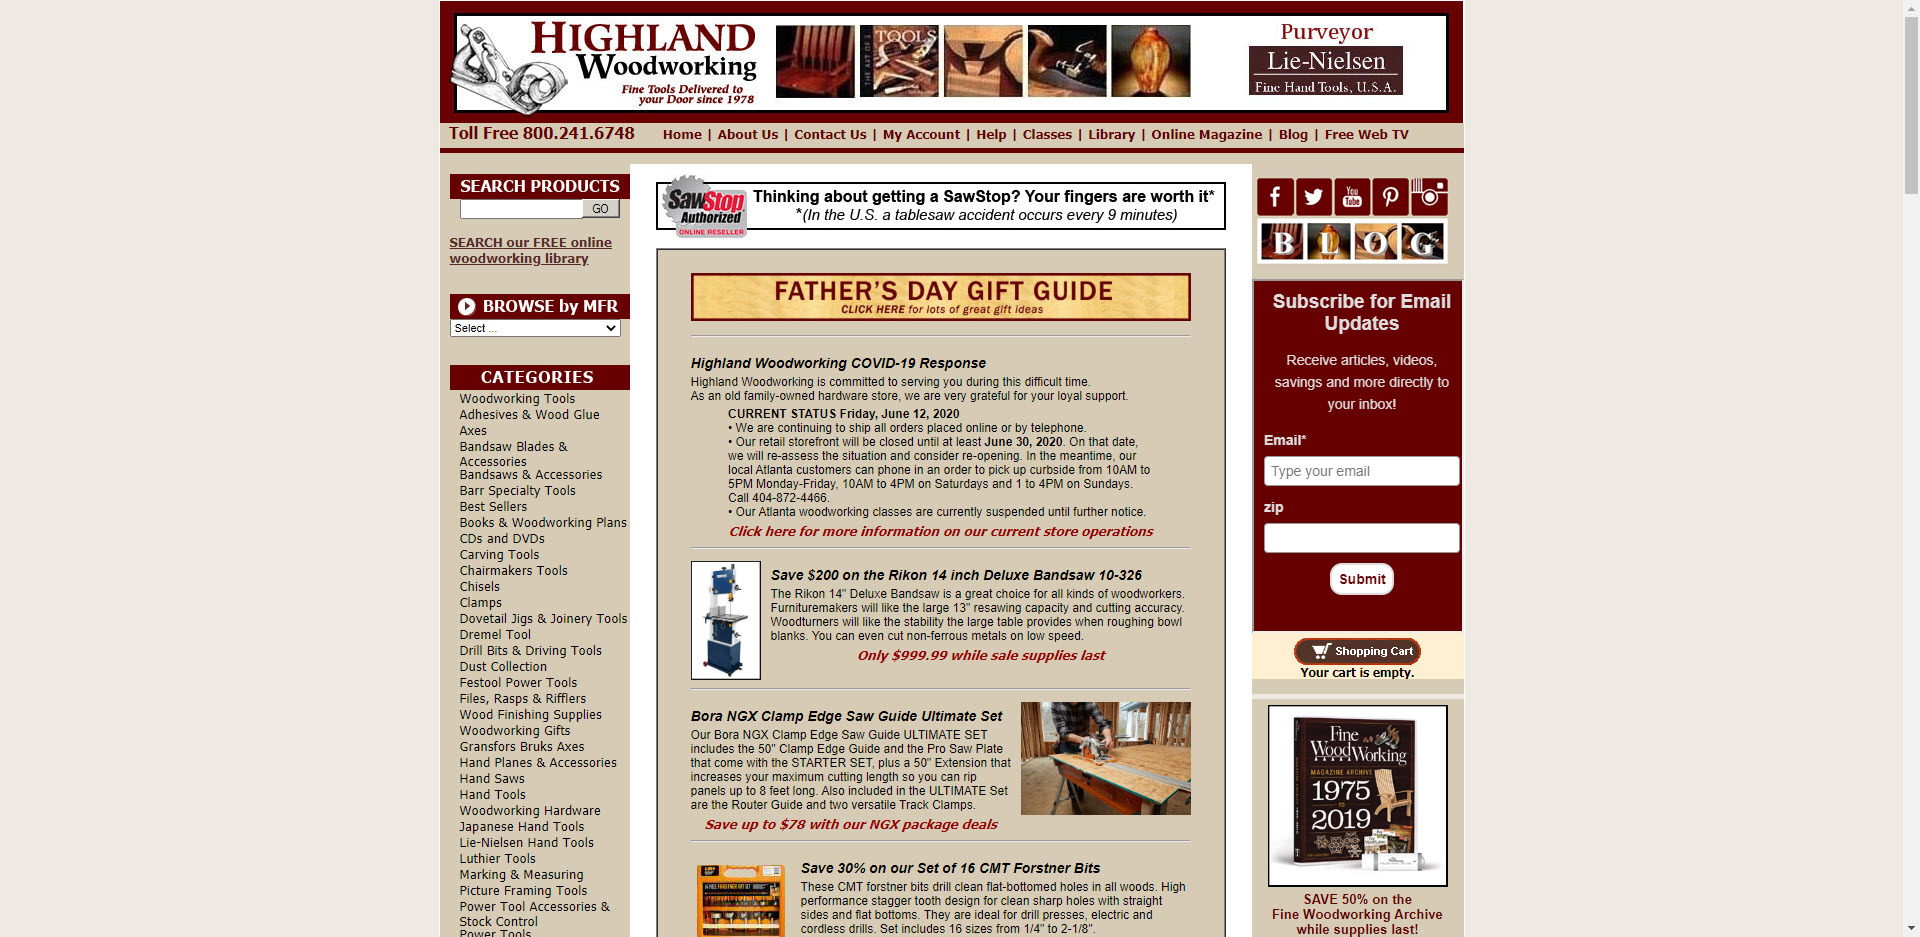 Power tools affiliate programs - Highland Woodworking